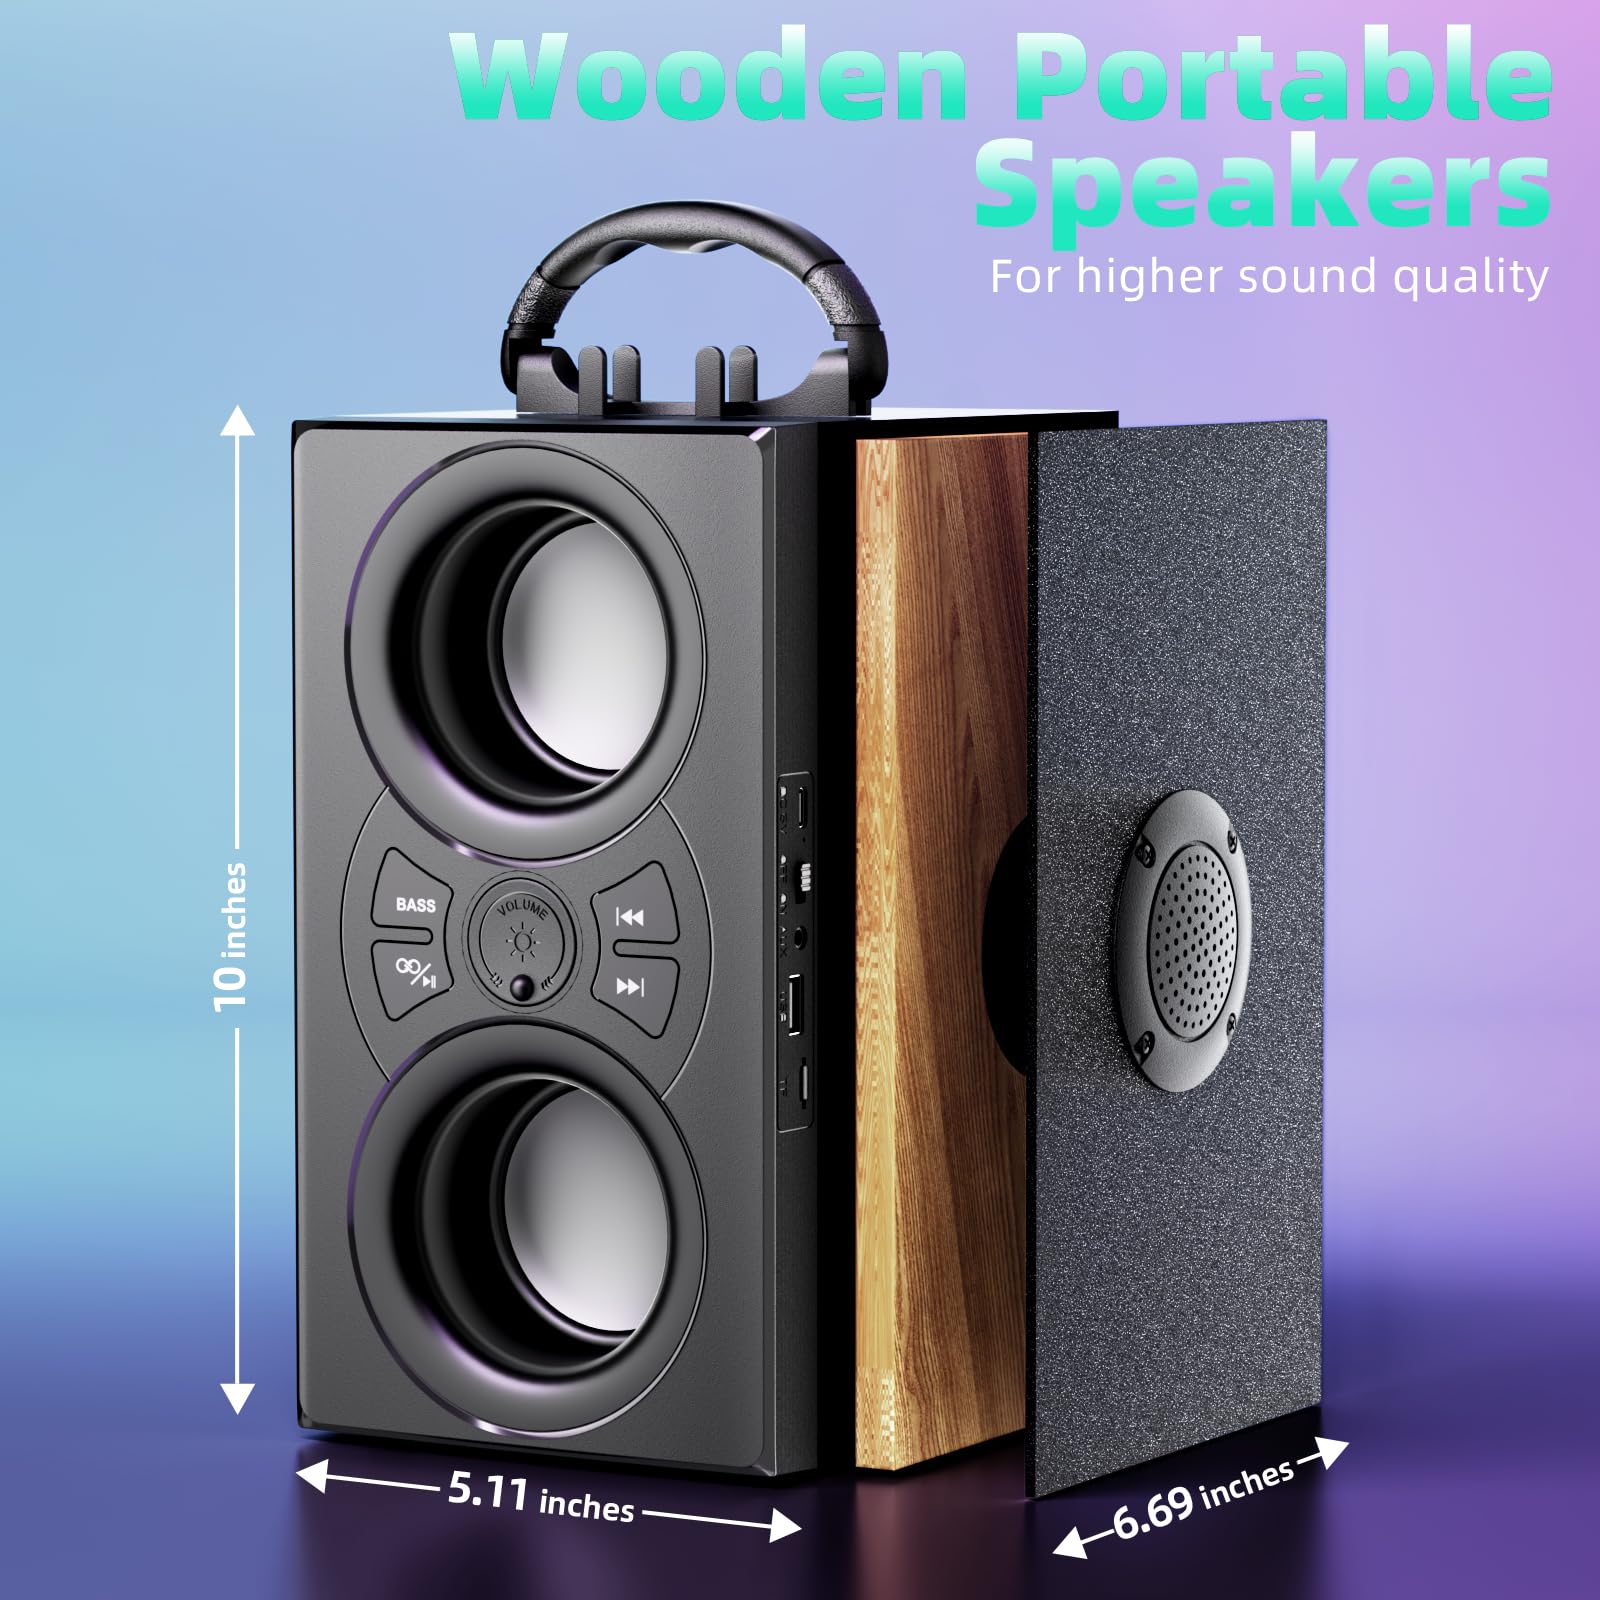 DINDIN Bluetooth Speakers, 40W Peak Wireless Speaker with Subwoofer, TWS, Big Bass, 80dB Portable Party Speaker with Lights for Beach, BBQ, Outdoor, Camping, Travel